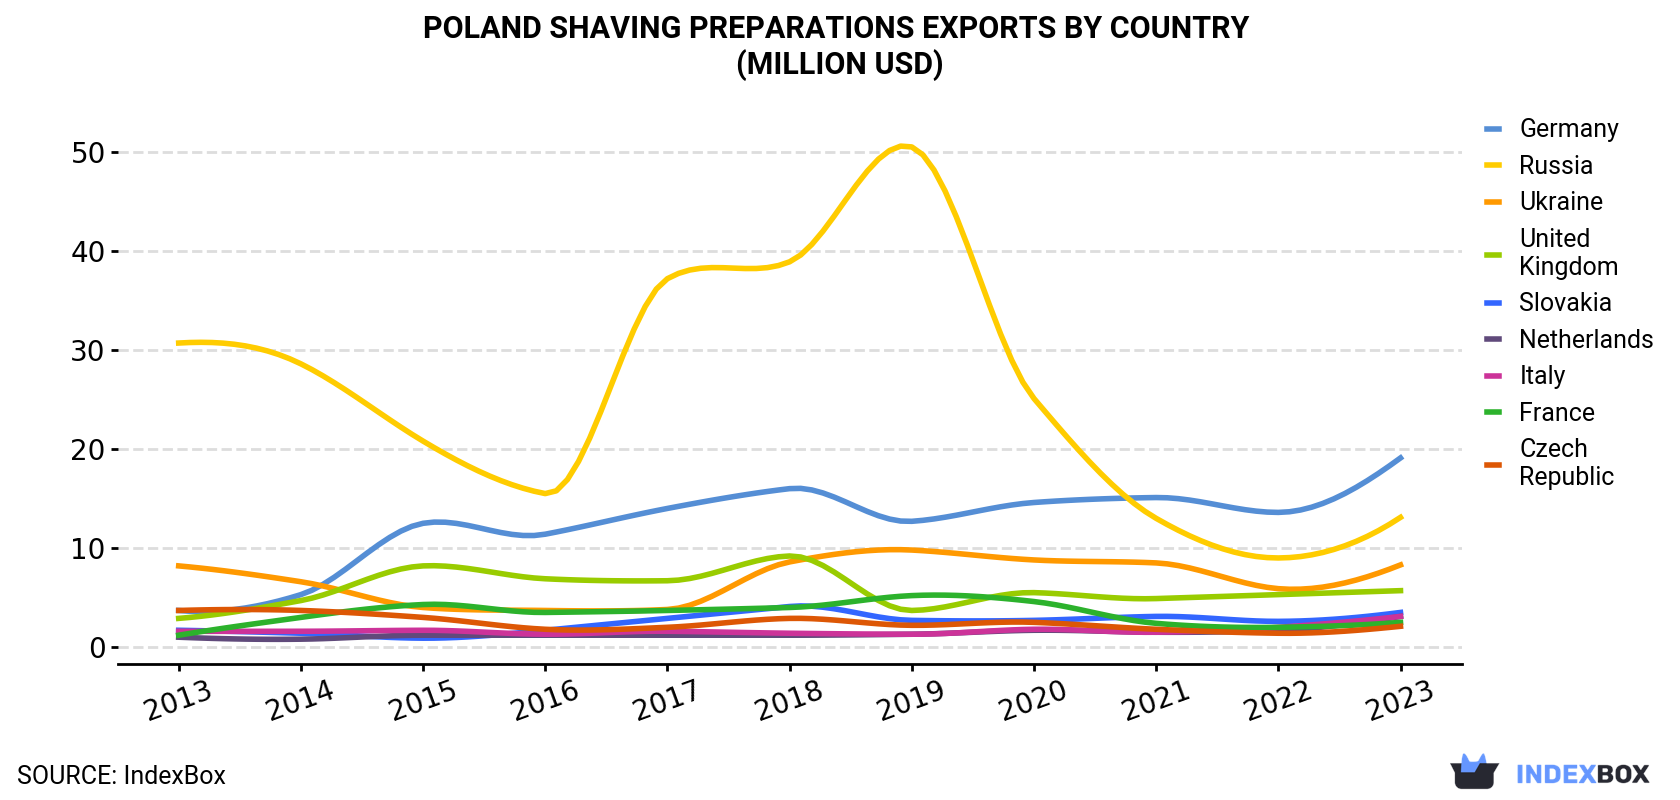 Poland Shaving Preparations Exports By Country (Million USD)